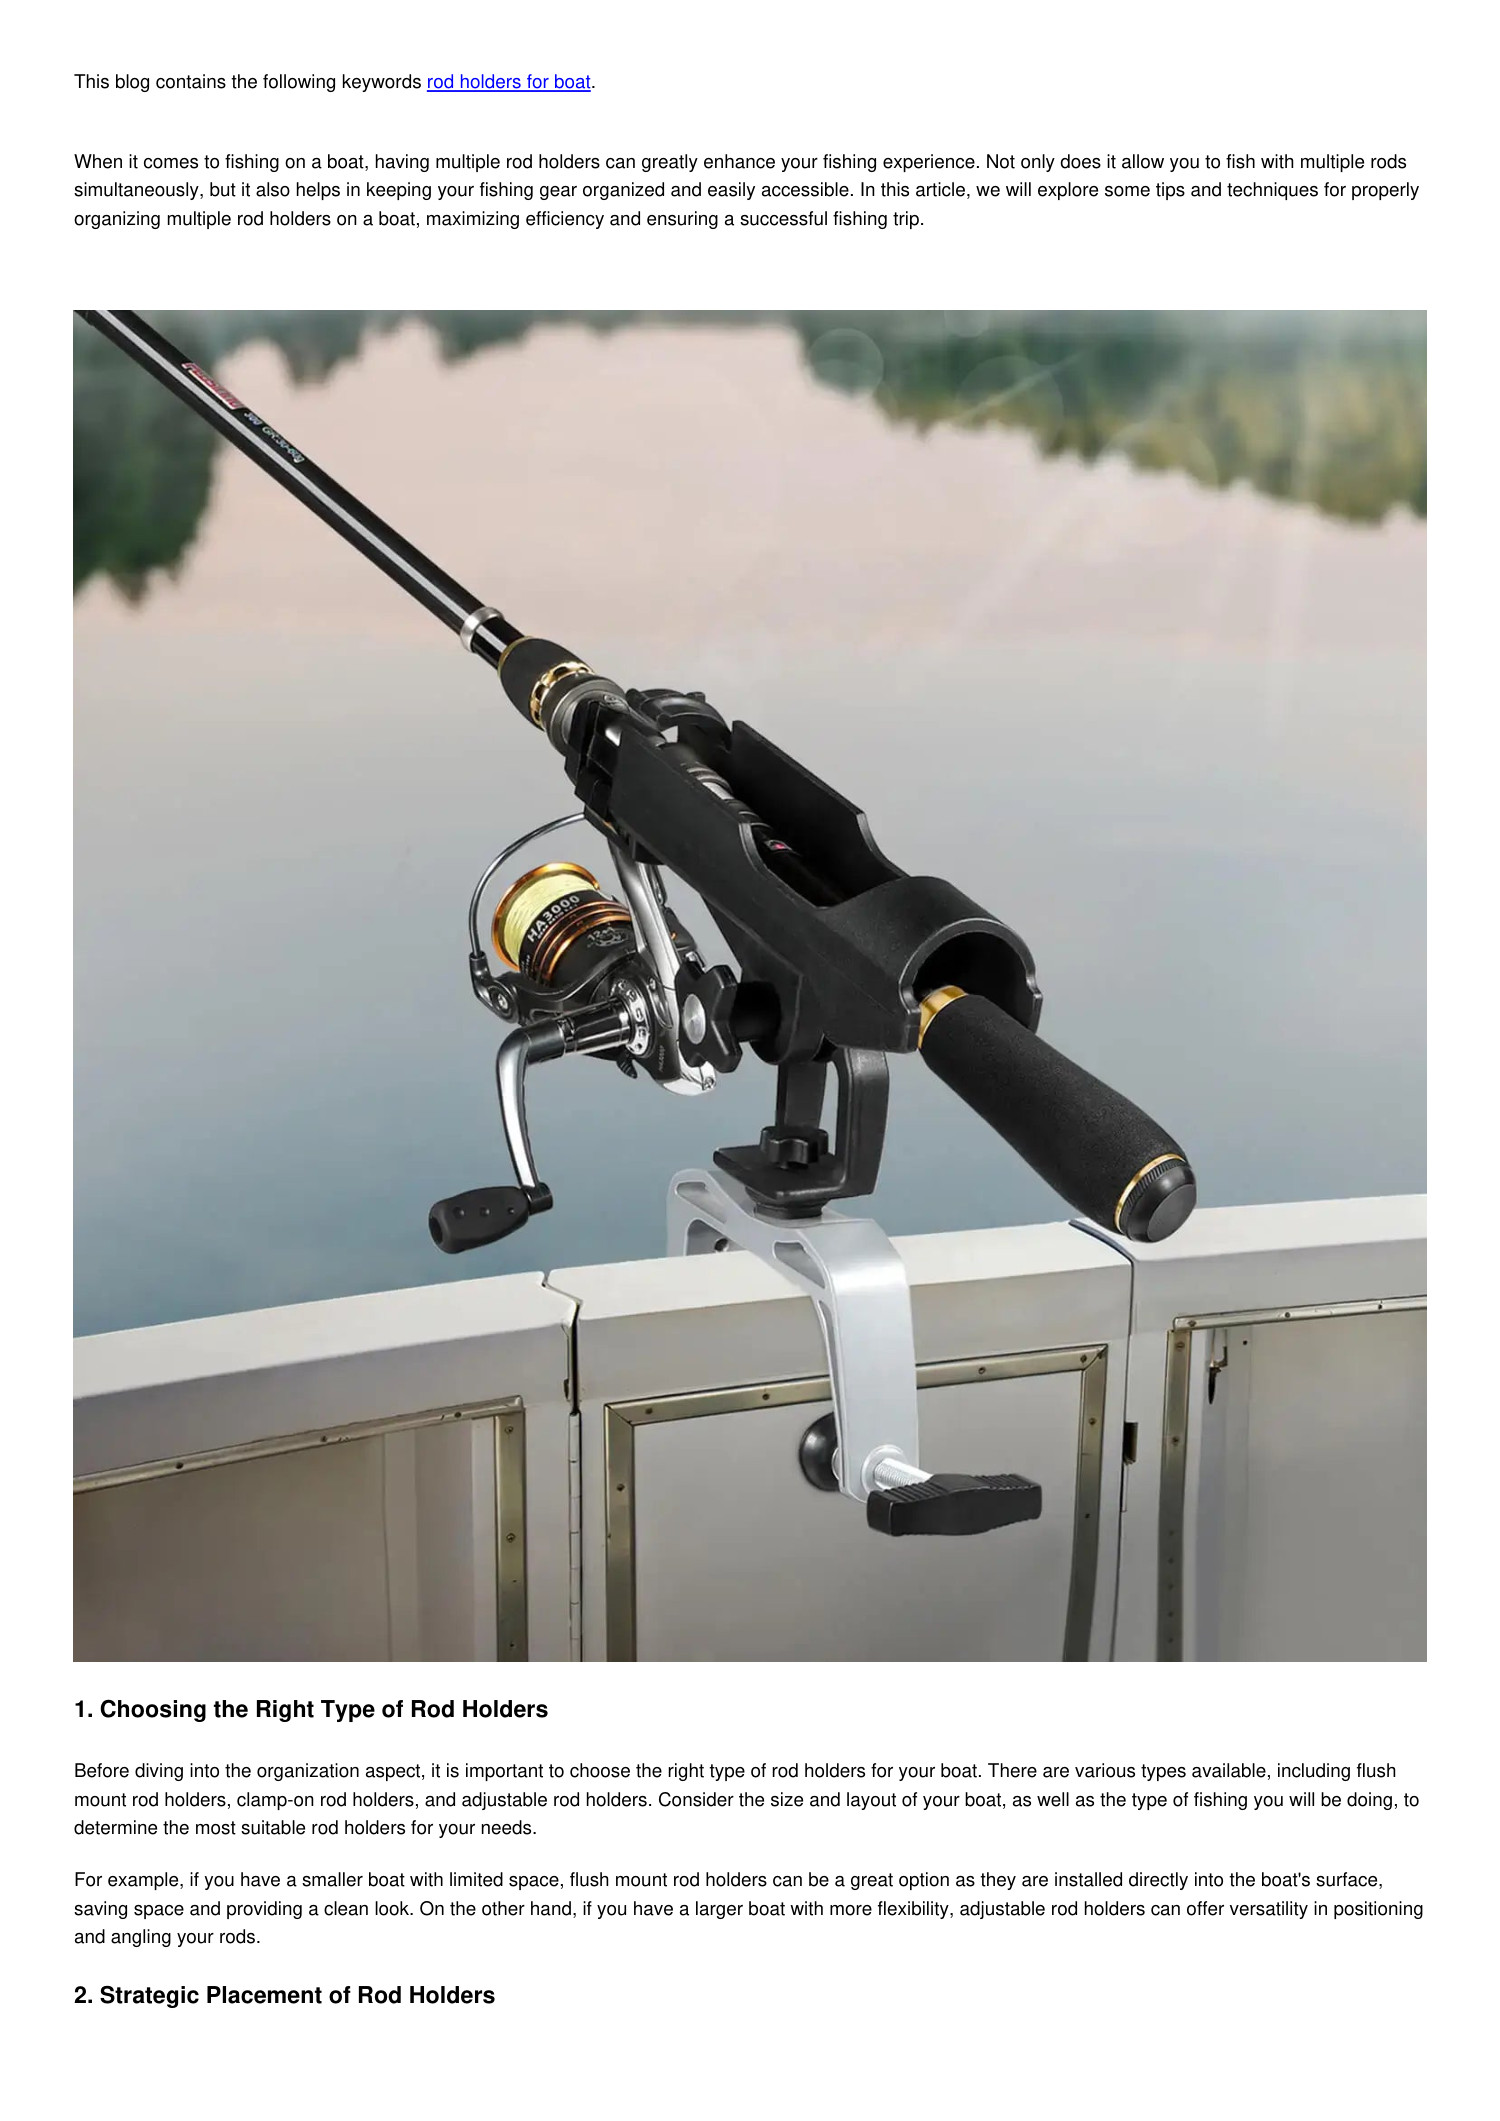 Maximizing Efficiency: Tips for Properly Organizing Multiple Rod Holders on  a Boat.pdf